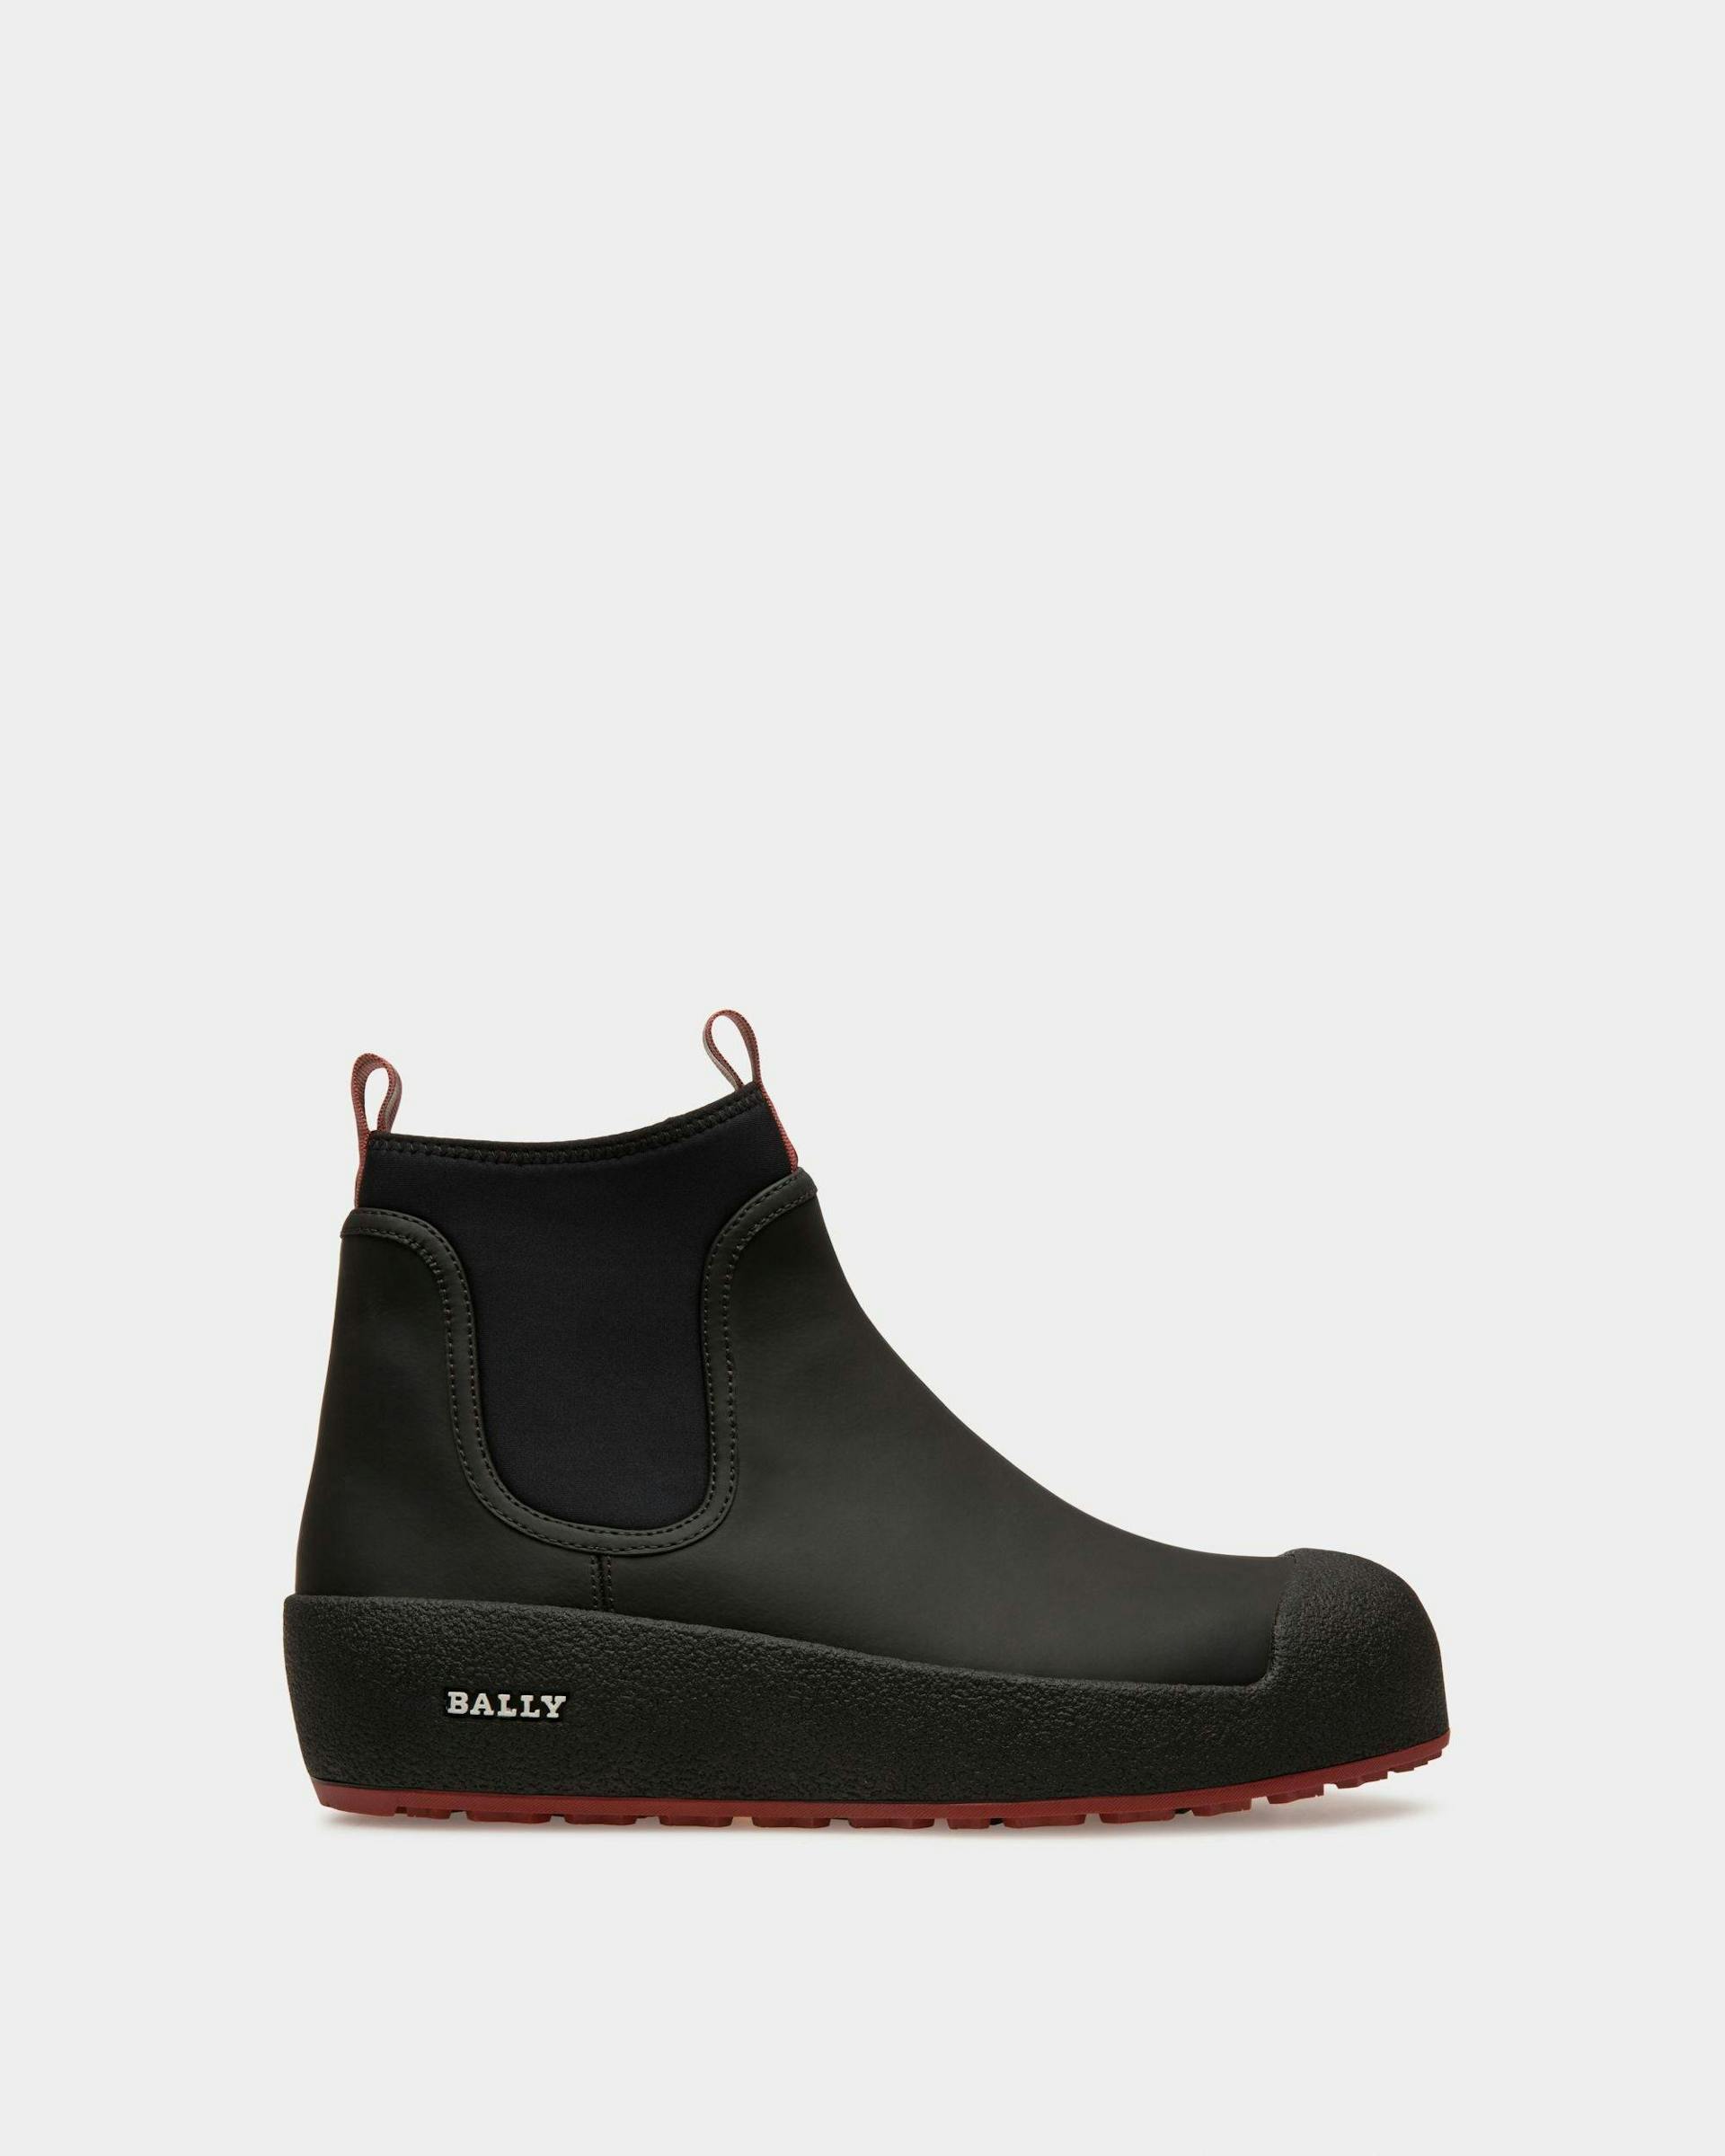 Bally Curling Booties - Bally